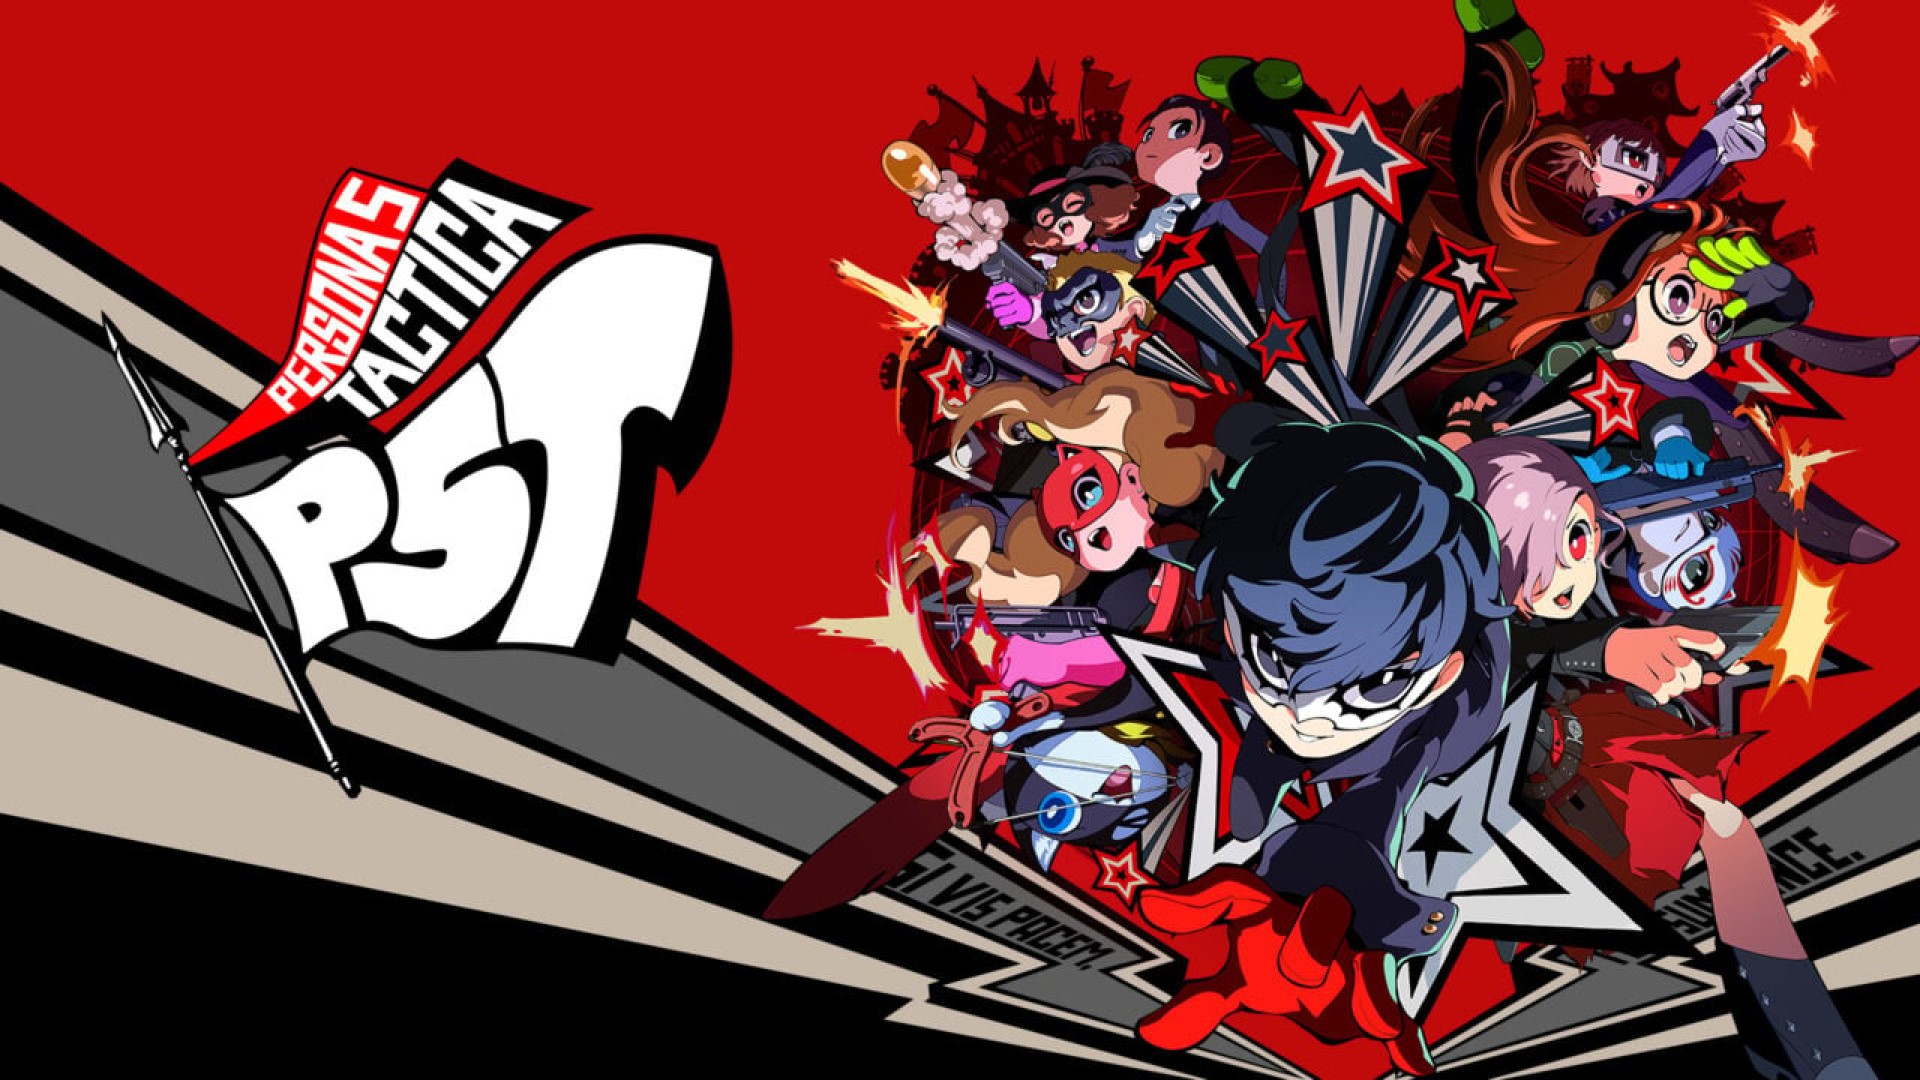 Persona 5 Tactica is Available Now for Consoles and PC